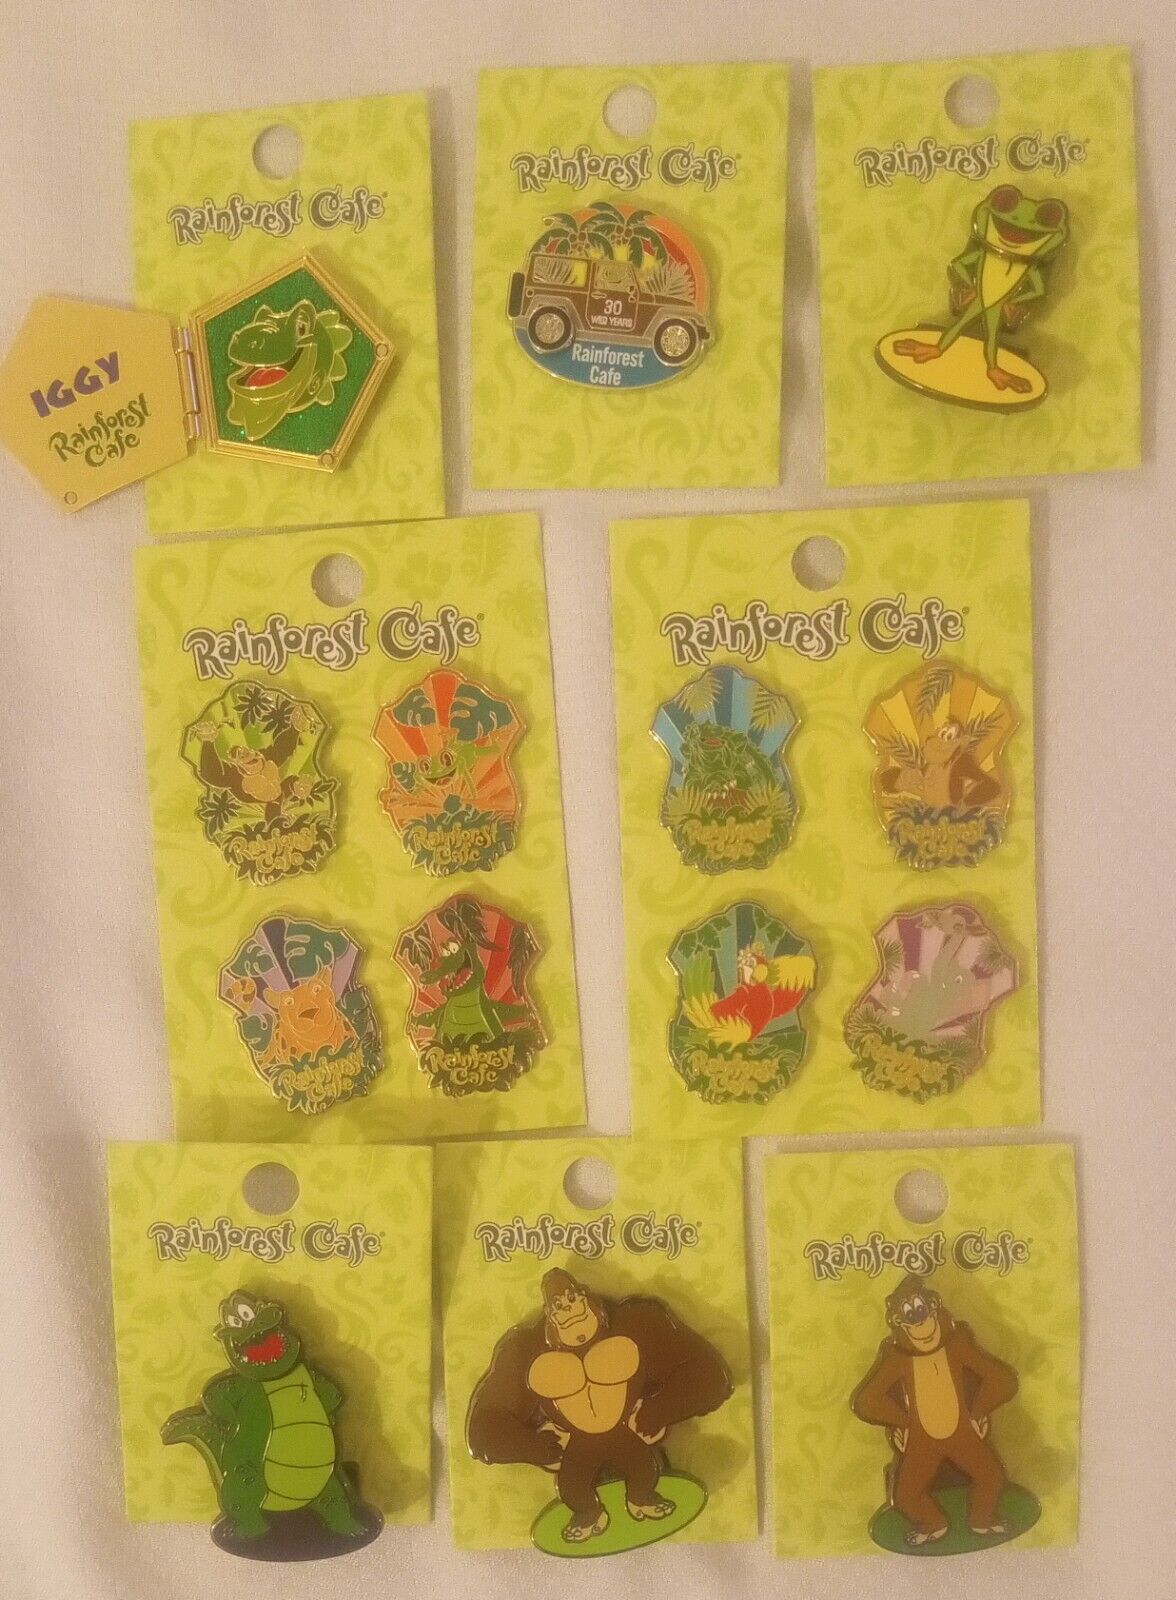 Rainforest Cafe 30th Anniversary Complete Set Of 14 Collectible Trading Pins